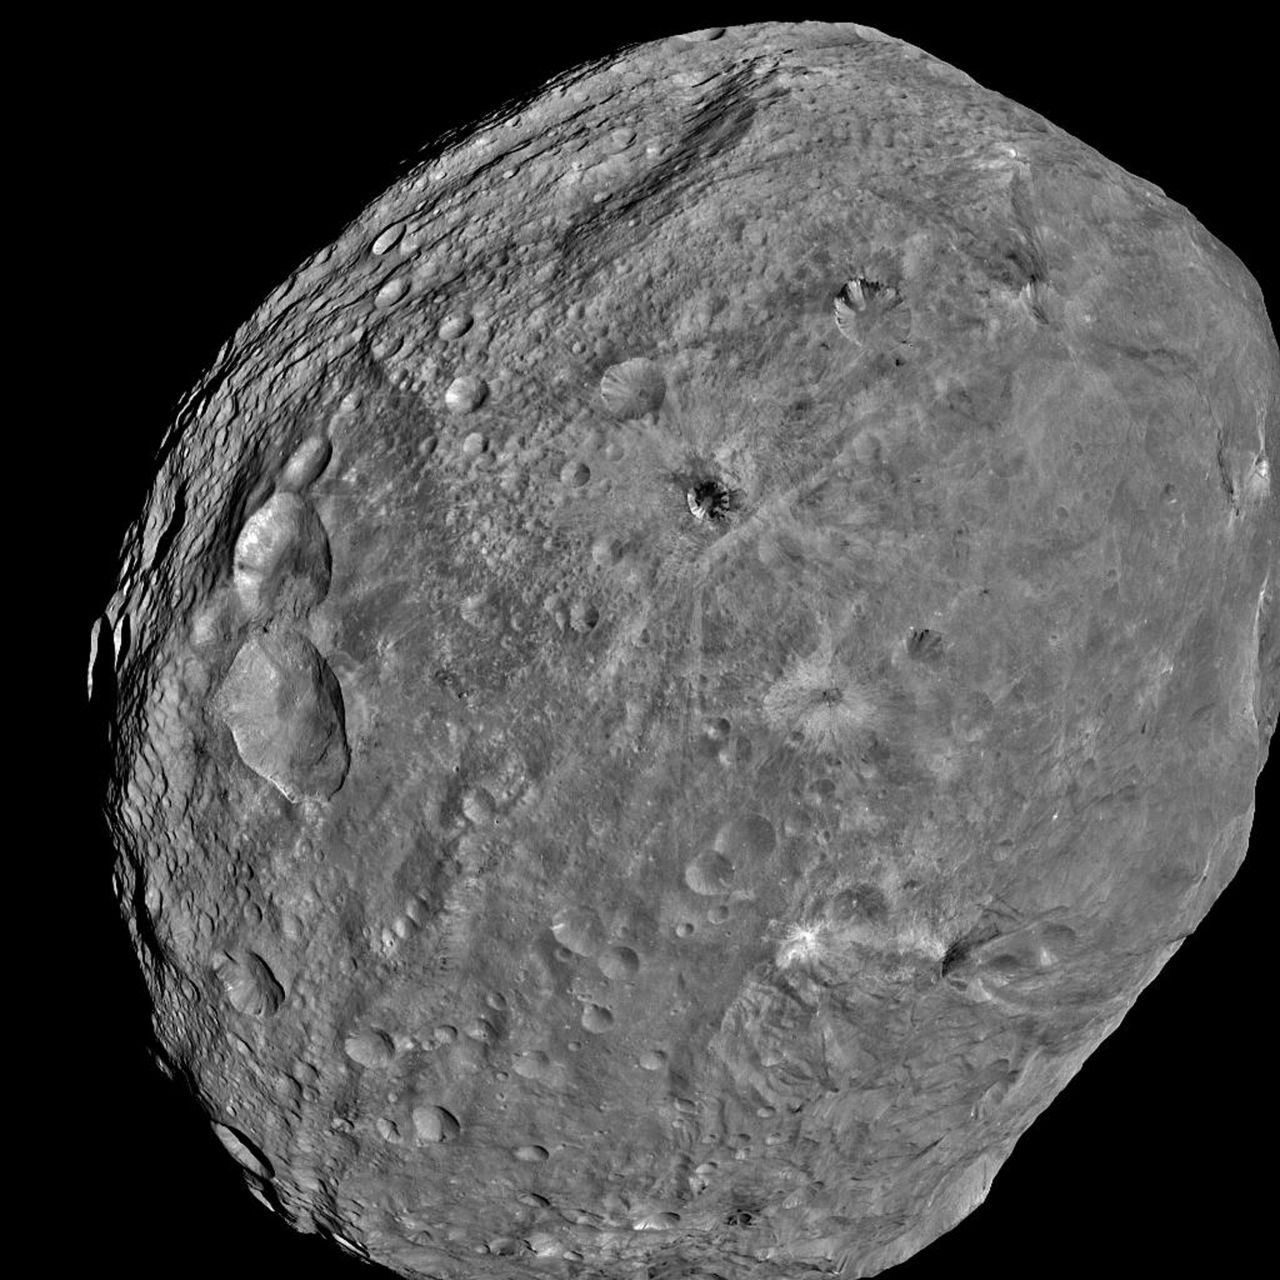 The giant asteroid Vesta is seen in an image taken from the NASA Dawn spacecraft. The Dawn spacecraft will next travel to the asteroid Ceres, arriving in 2015.